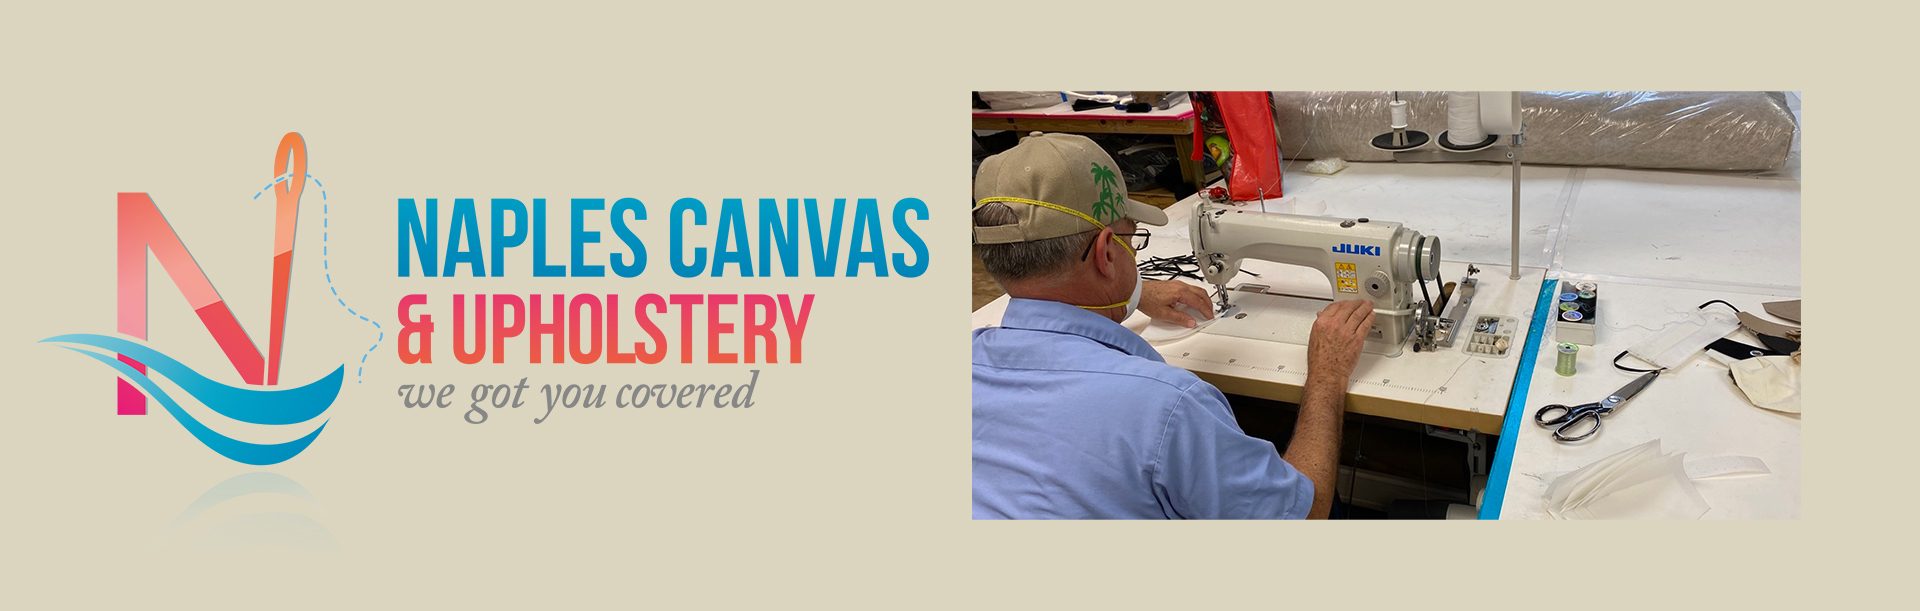 Naples Canvas and Upholstery Florida